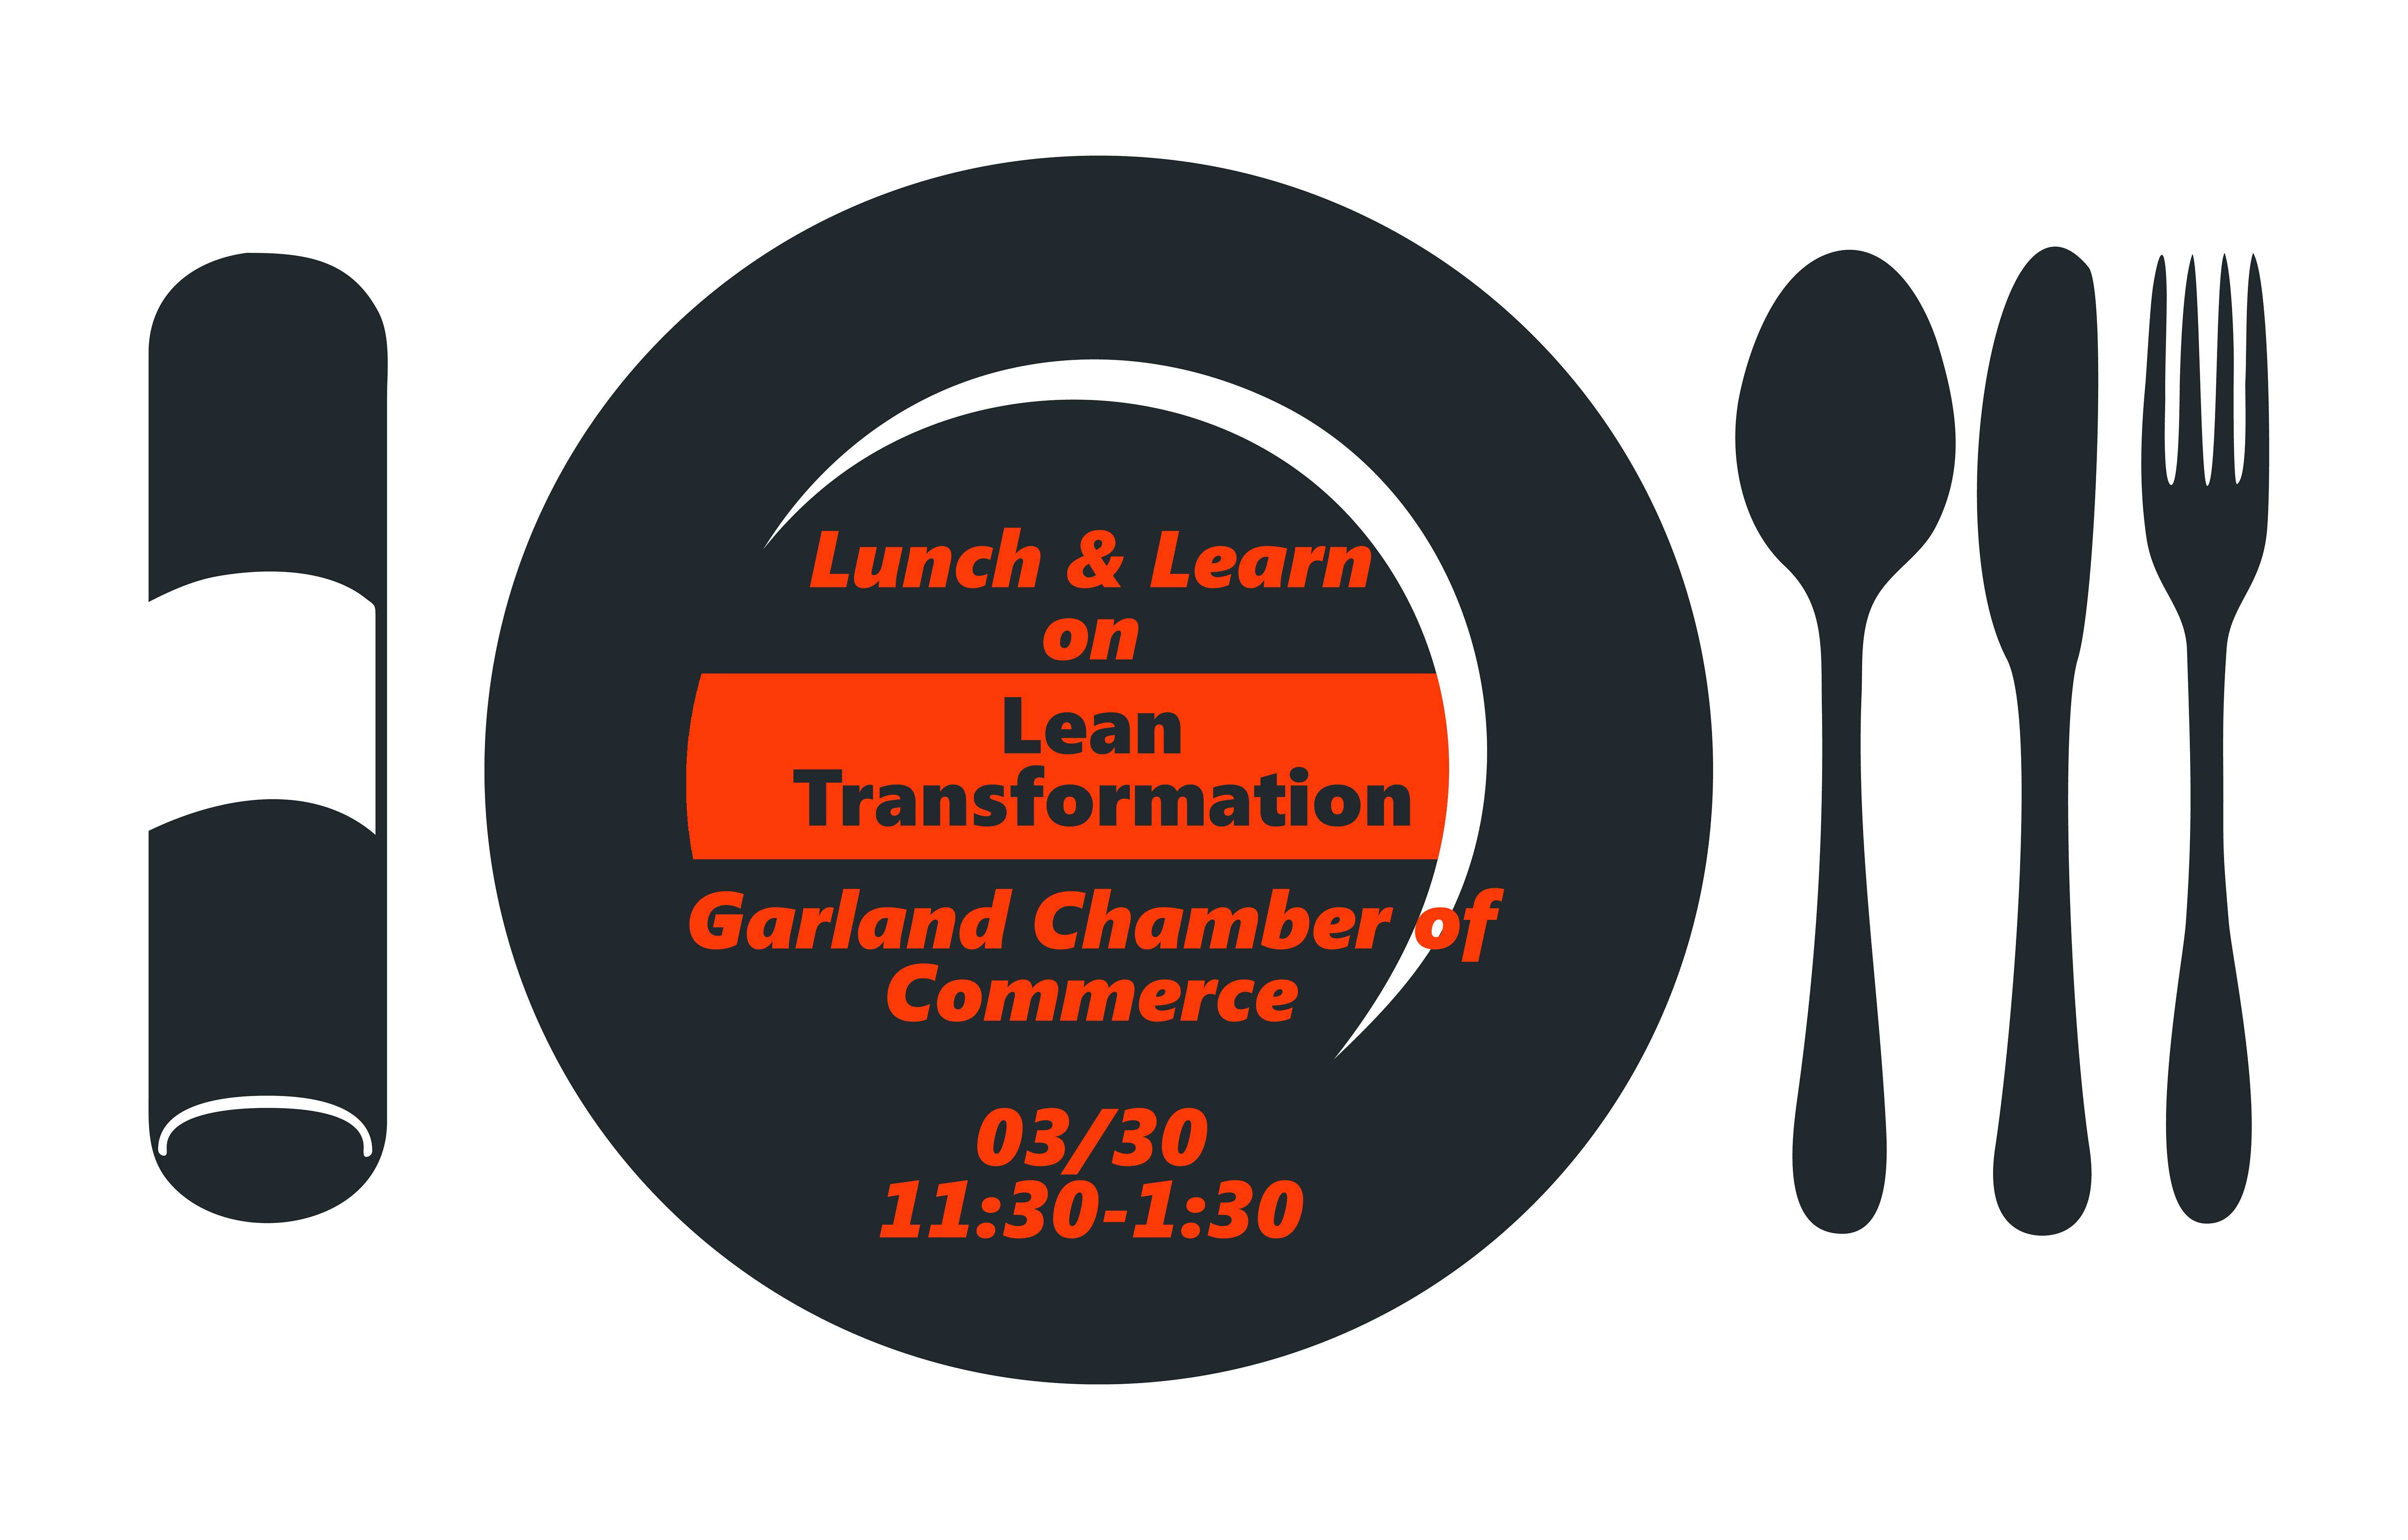 Attend Lunch & Learn - Manufacturing Lean Transformation Event